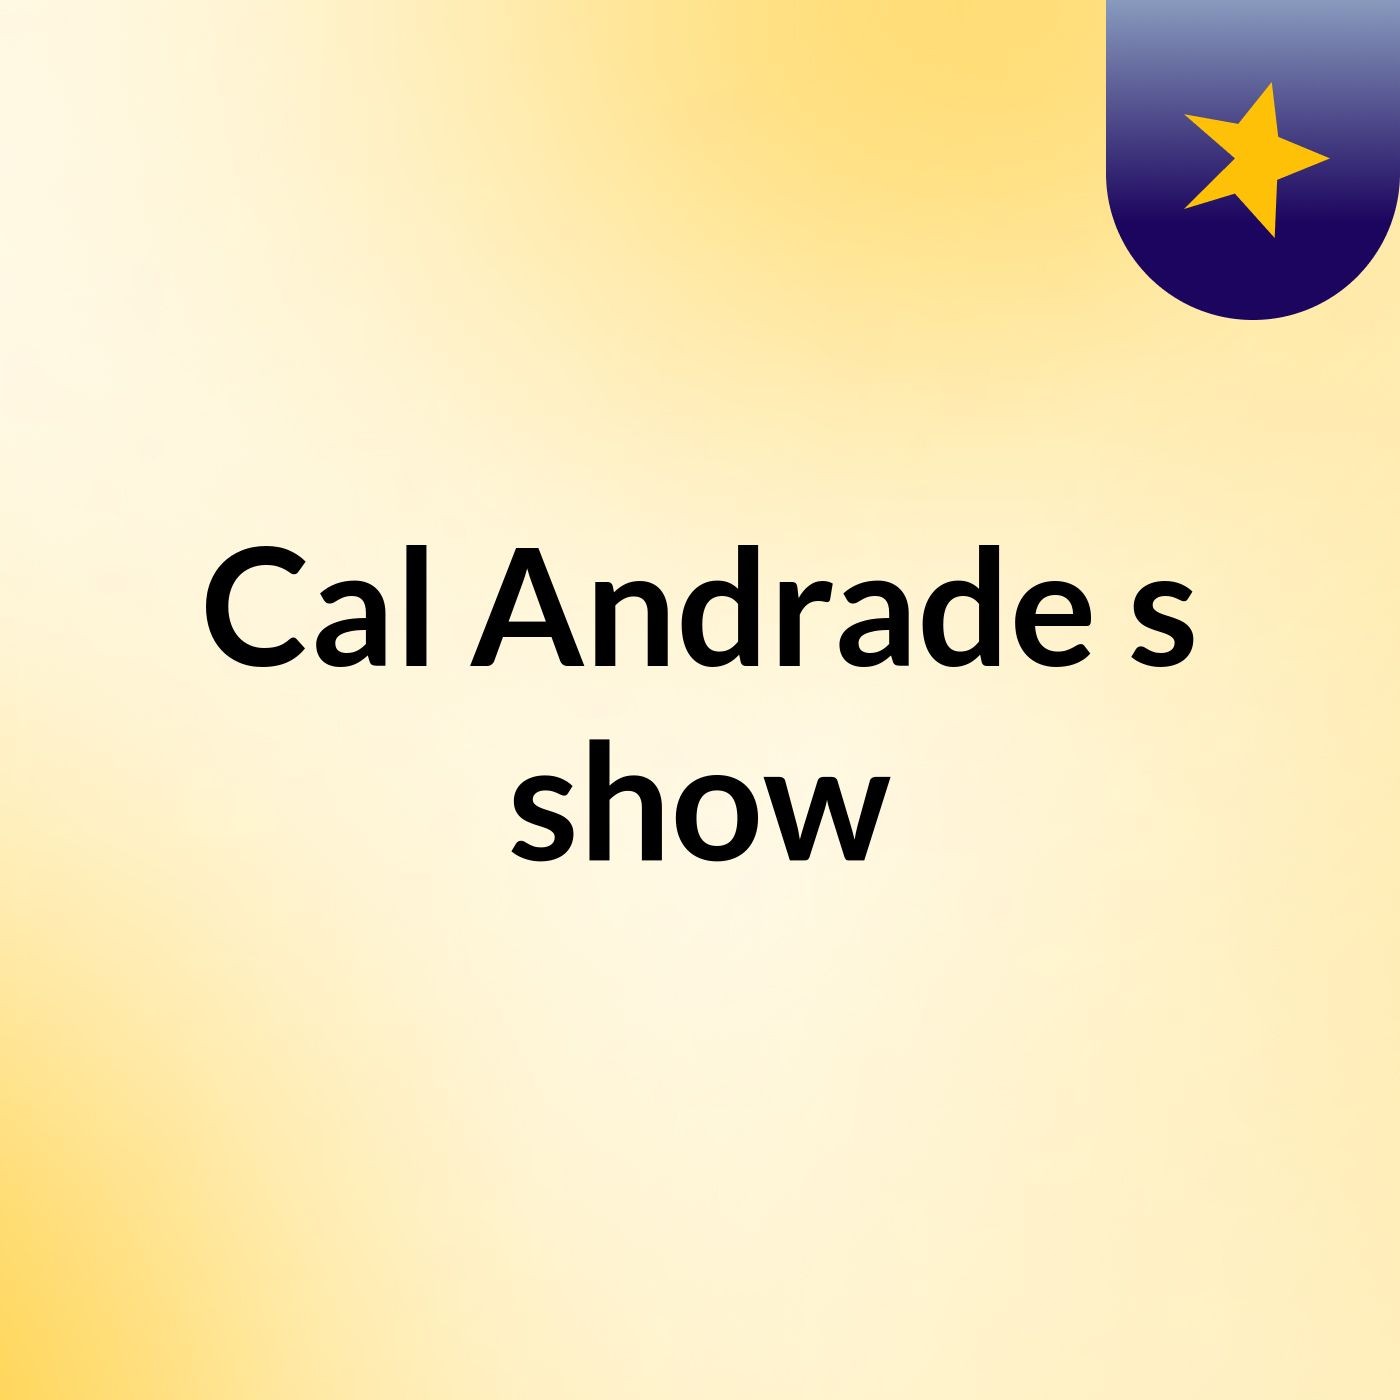 Cal Andrade's show